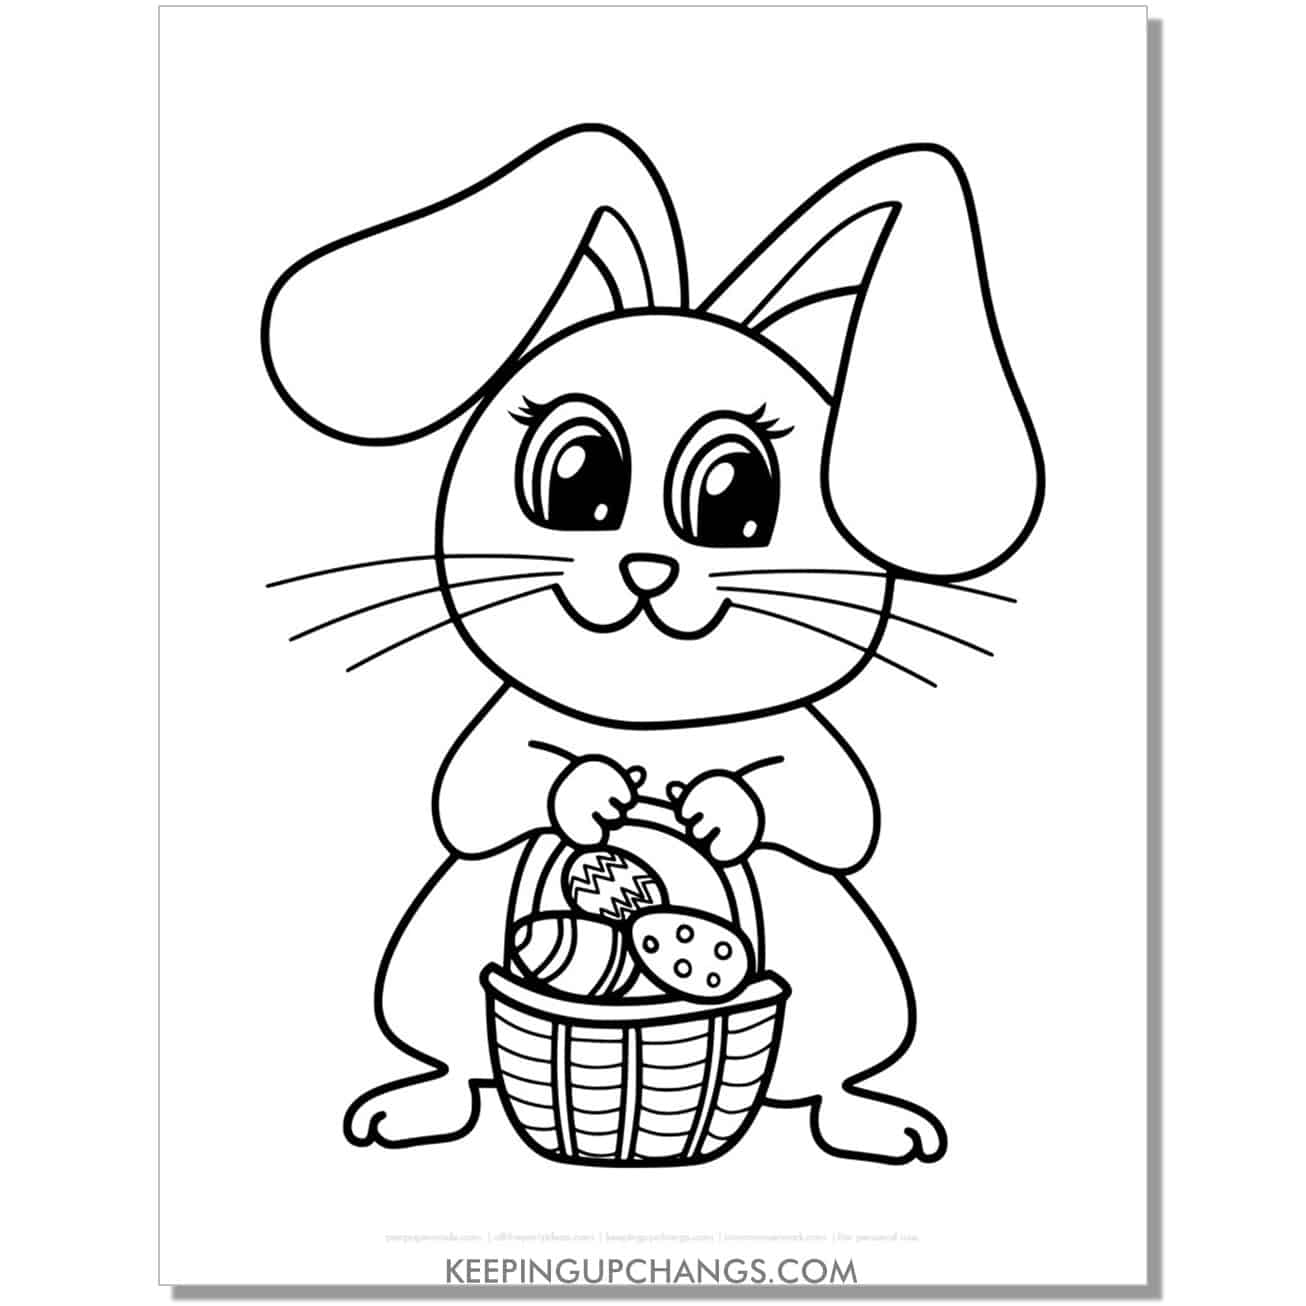 Easter bunny with large anime eyes holding Easter basket coloring page, sheet.